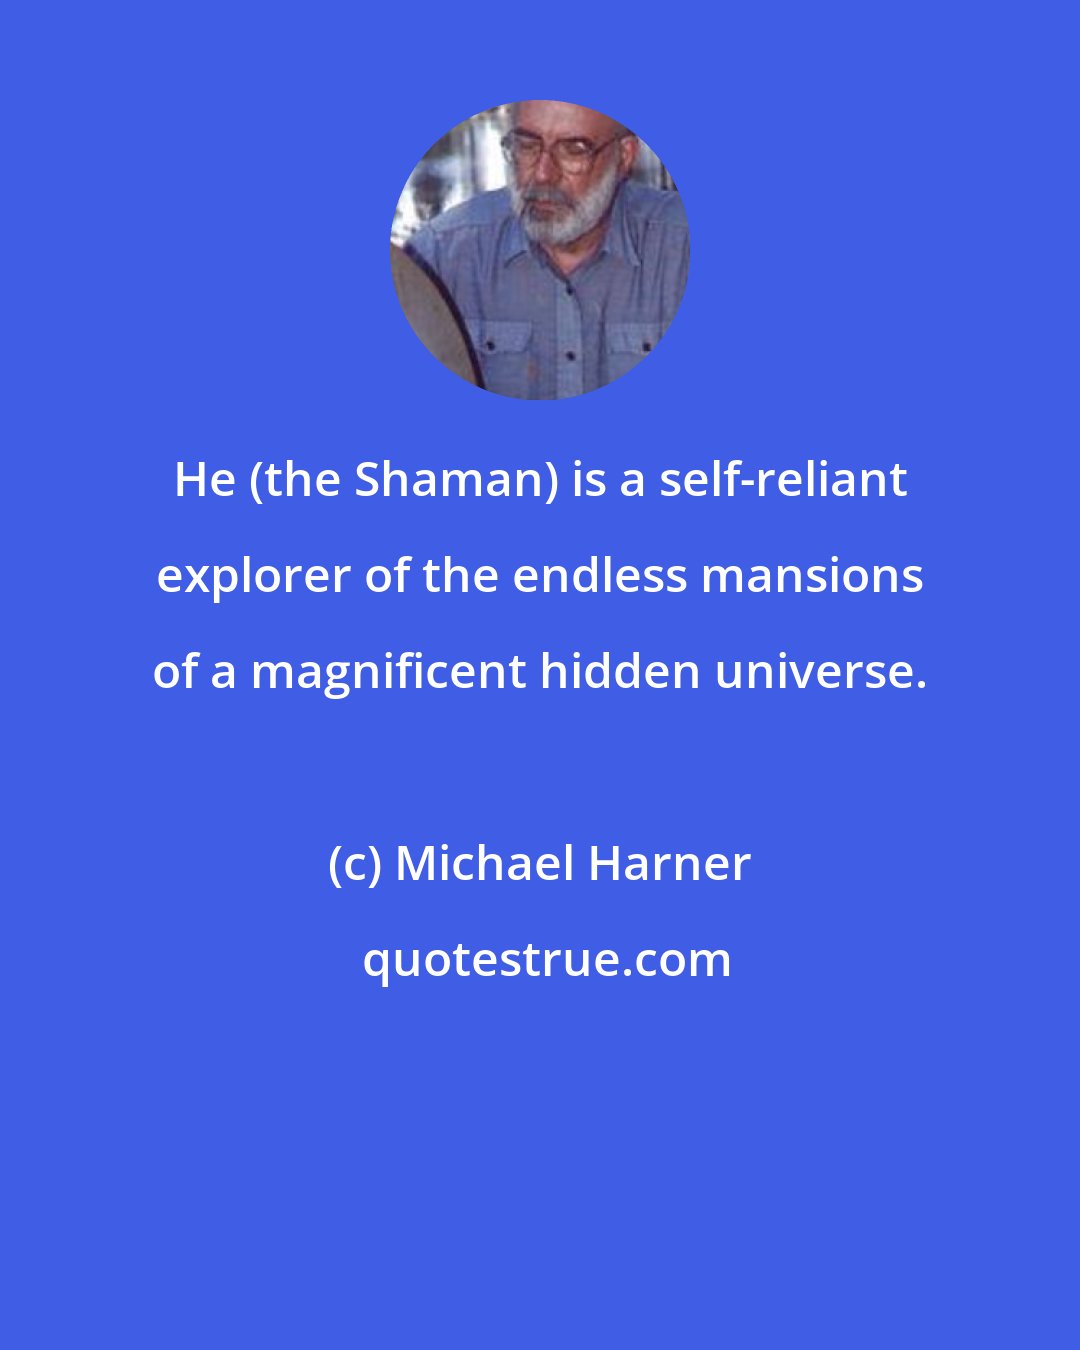 Michael Harner: He (the Shaman) is a self-reliant explorer of the endless mansions of a magnificent hidden universe.